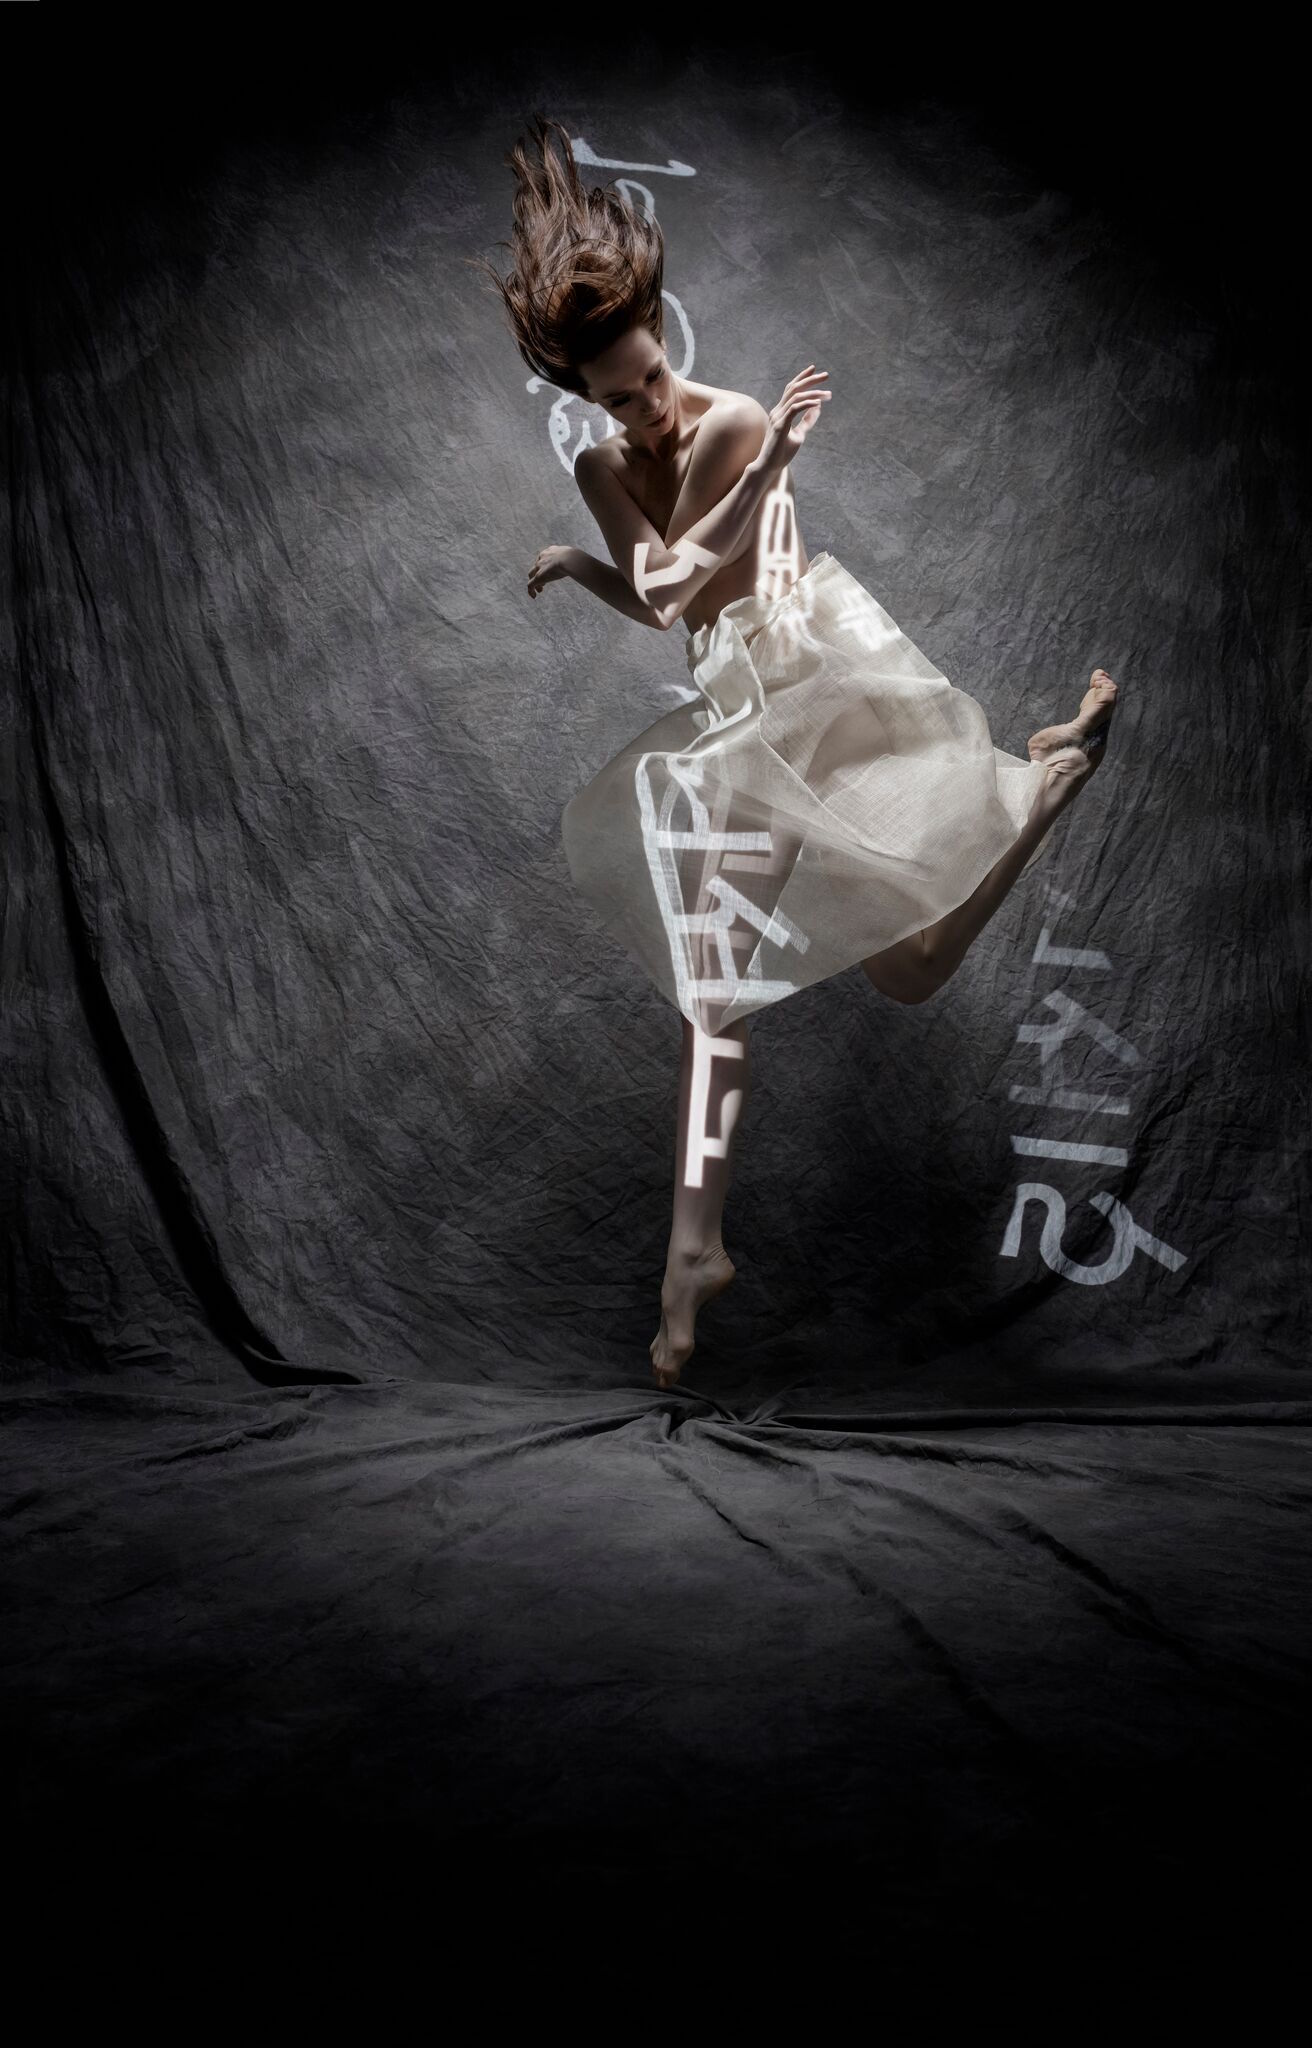 A promotional image for the language-inspired ballet